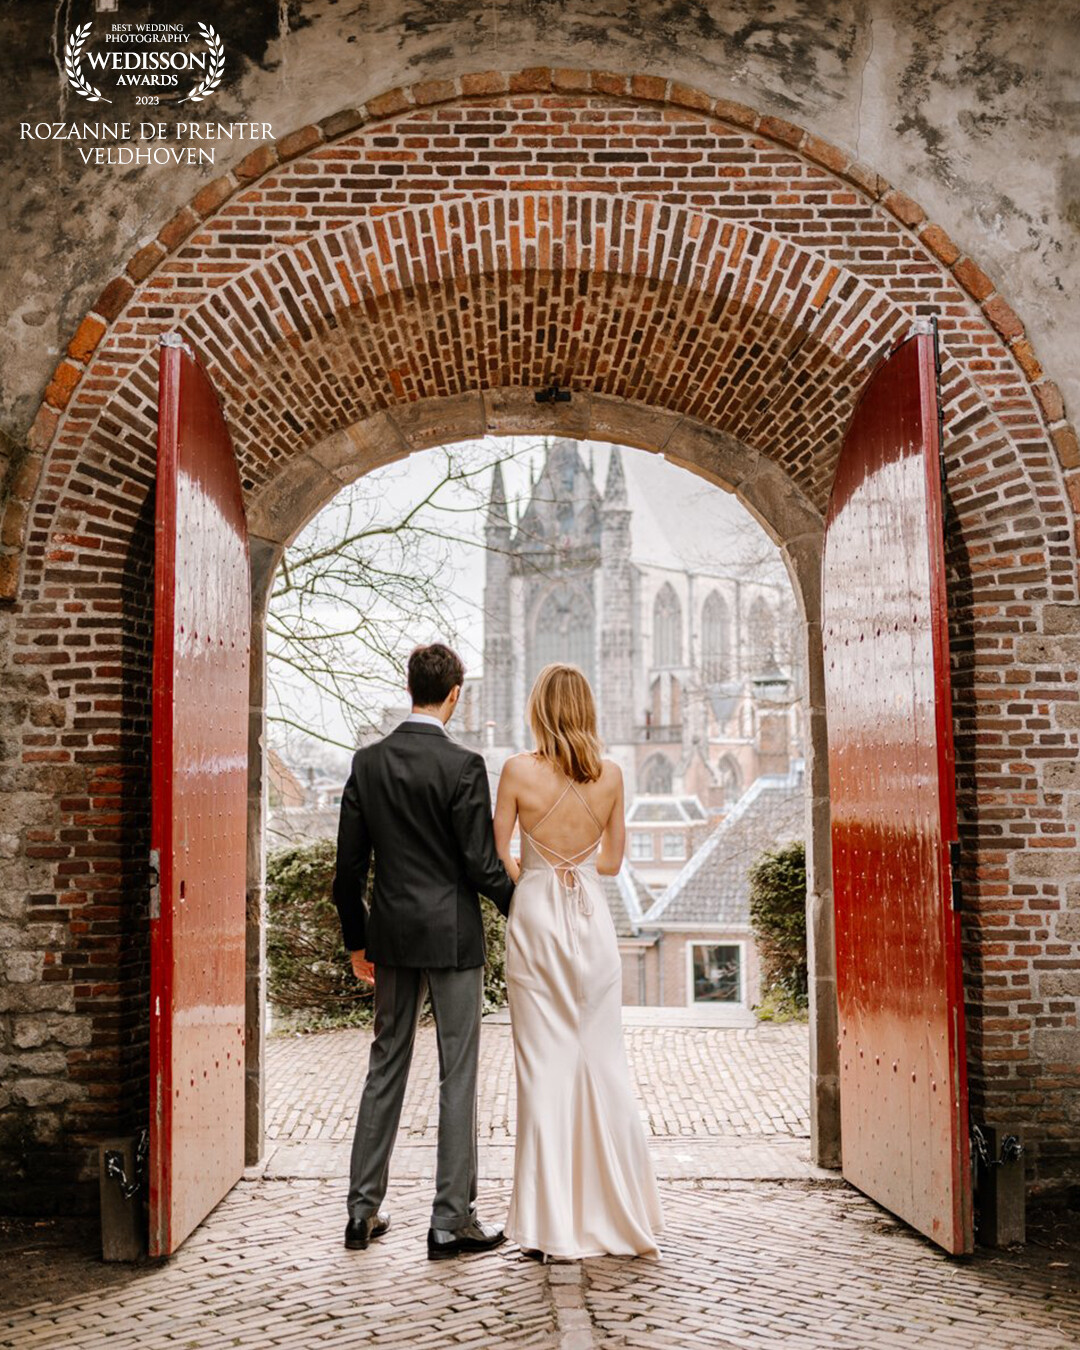 This photo is taking at the Burcht in Leiden. A fantastic historic spot with a fantastic wedding couple.